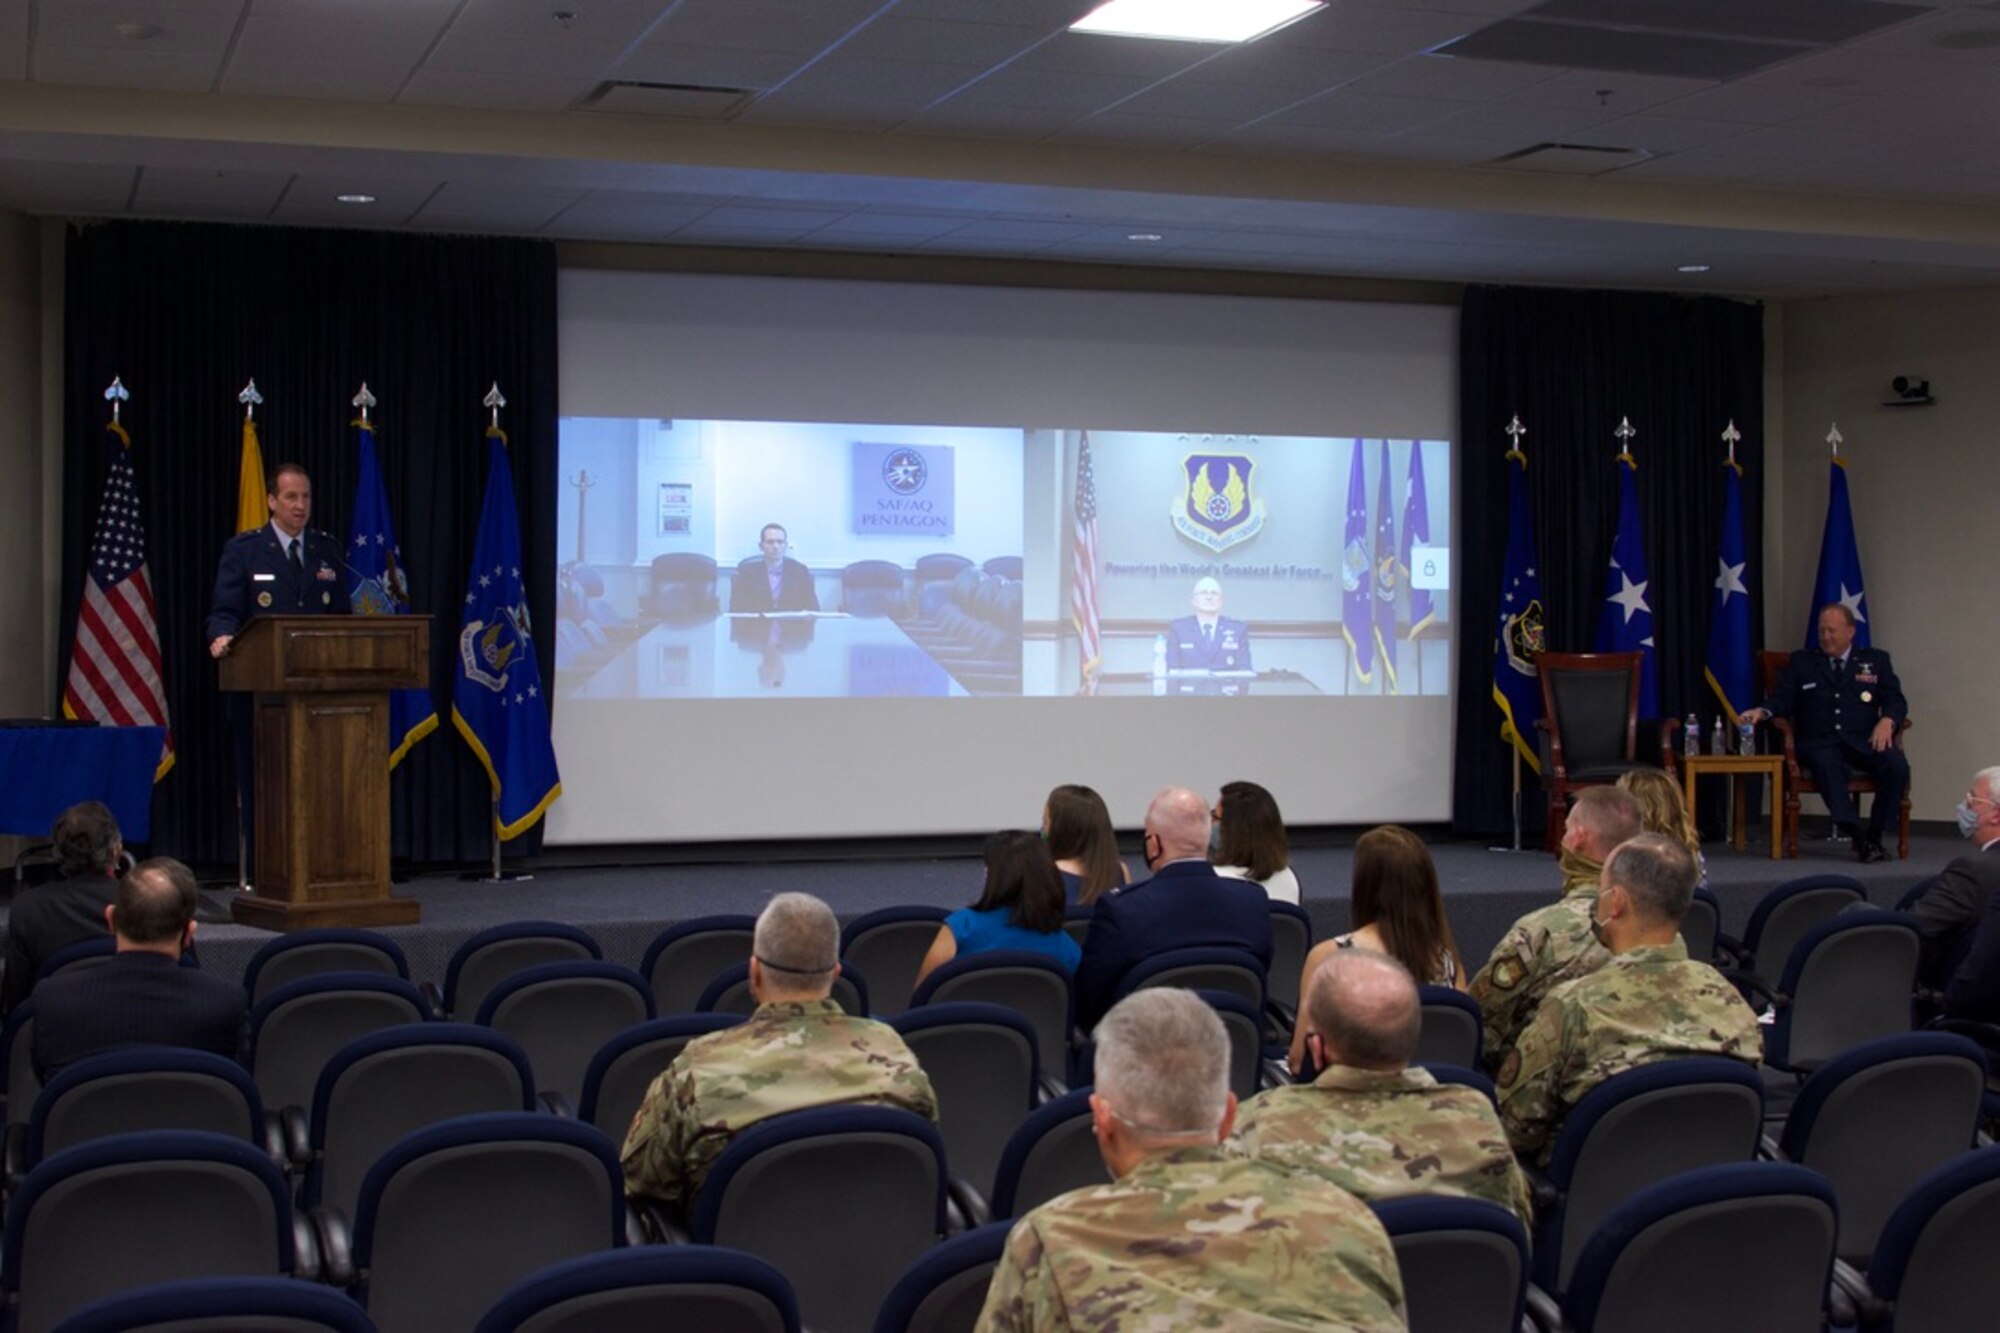 Brig. Gen. Anthony W. “Awgie” Genatempo, right, took command of the Air Force Nuclear Weapons Center during a ceremony June 26 at Kirtland AFB, New Mexico. He succeeds Maj. Gen. Shaun Q. Morris, left, who took command of AFNWC in October 2017. Gen. Arnold W. Bunch, Jr., commander, Air Force Materiel Command, on right of screen projection, virtually presided over the center’s change-of-command ceremony. Dr. Will Roper, Air Force assistant secretary for acquisition, technology and logistics, on left of screen, virtually presided over the change in leadership for the Air Force program executive officer for strategic systems, a dual-hatted position for the center commander. (Air Force photos by Capt. Matthew Rice)